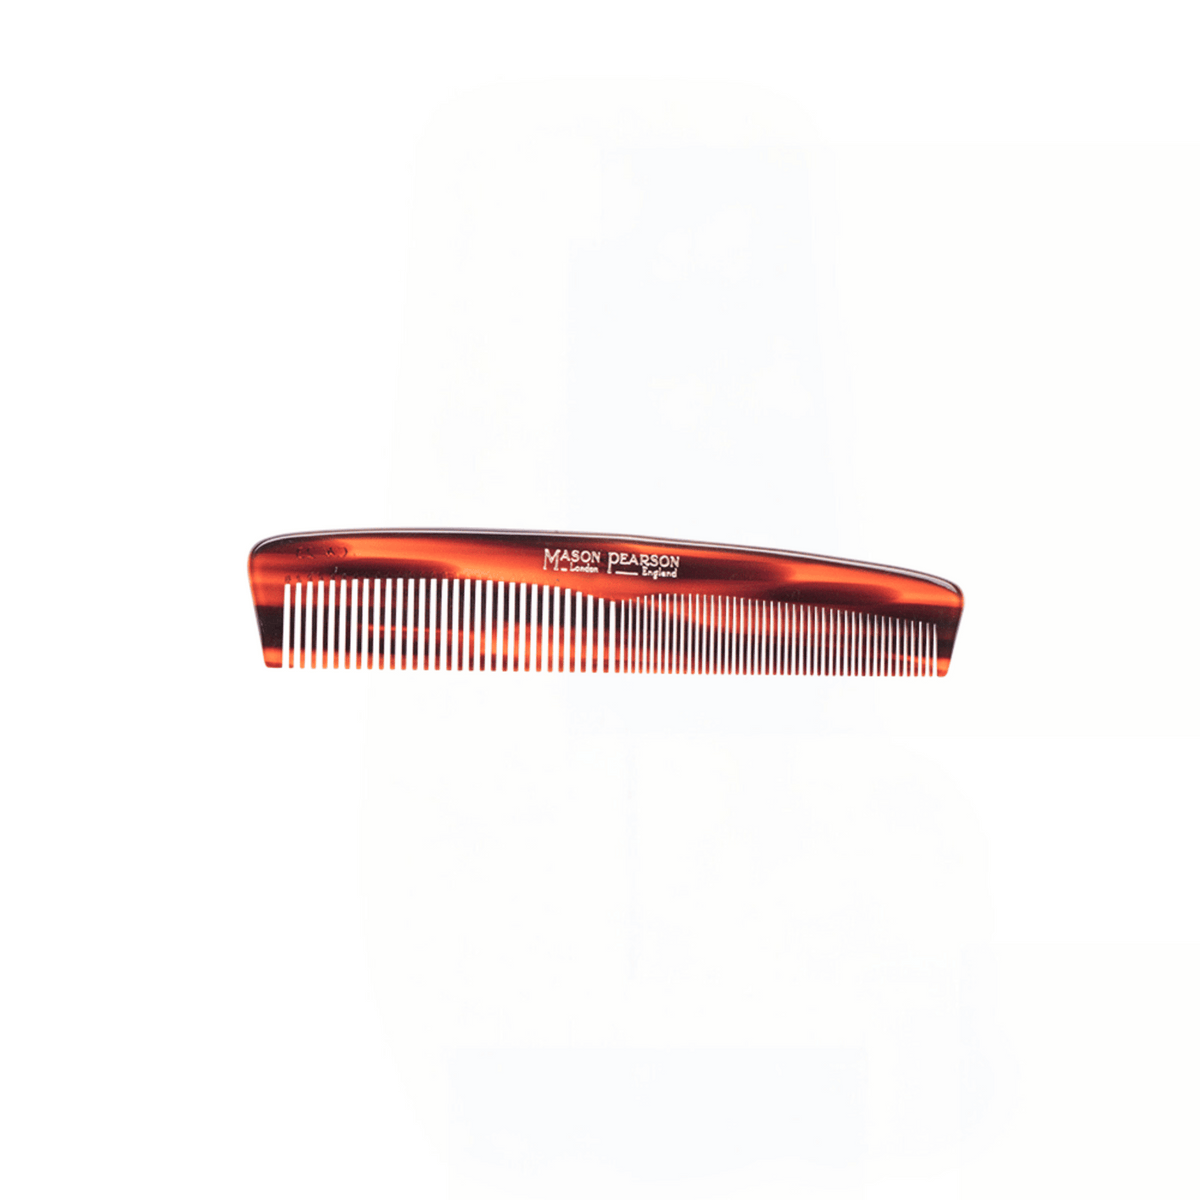 Primary Image of Styling Comb